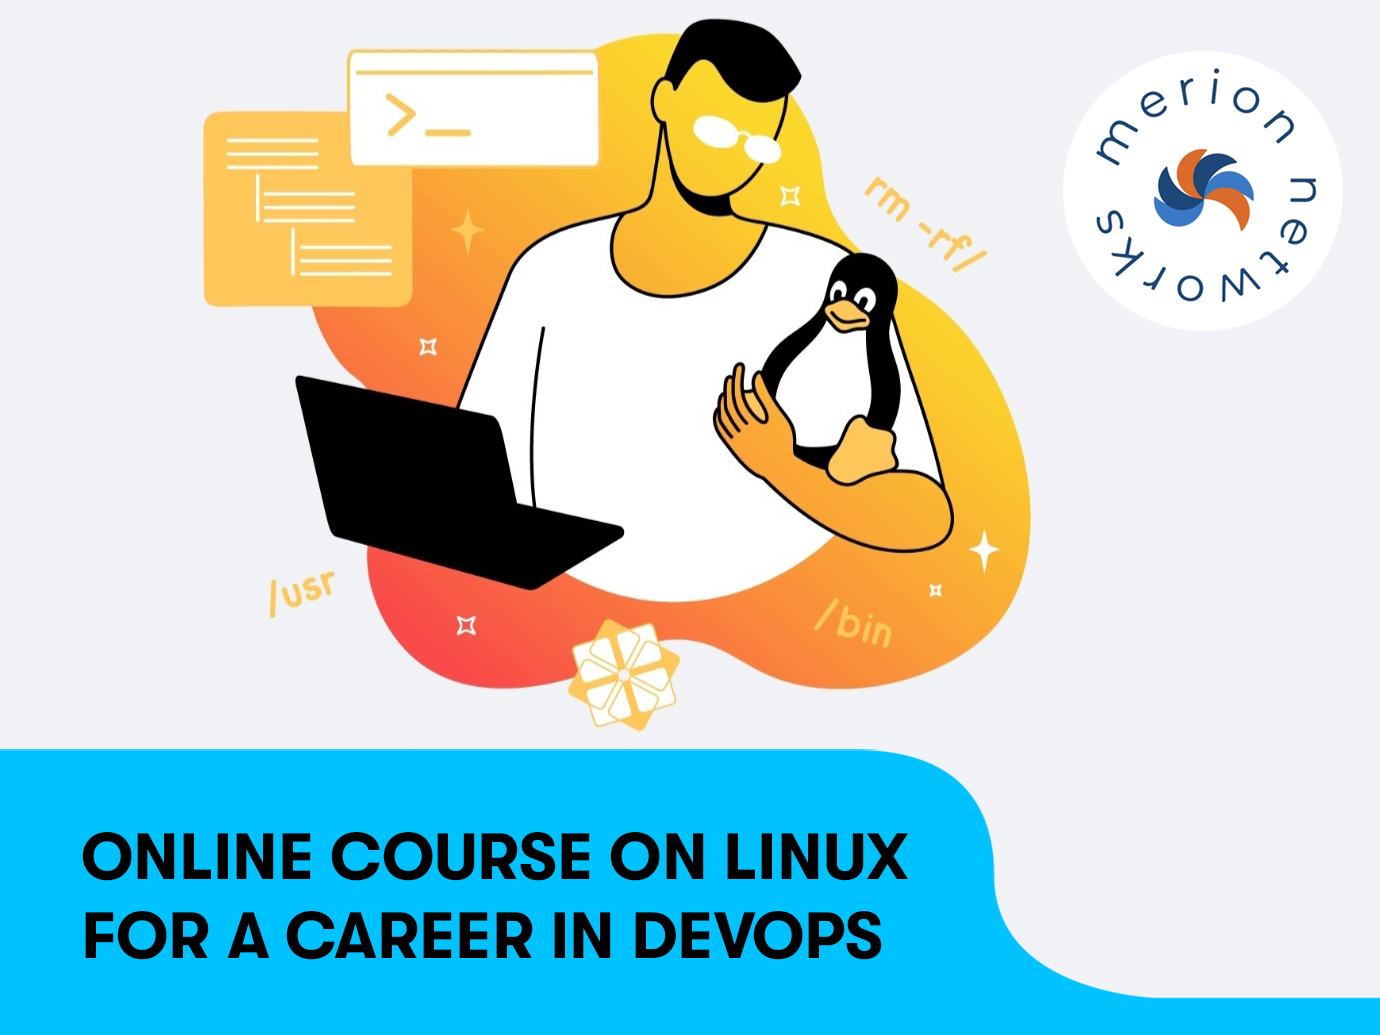 An online course on Linux for a career in DevOps